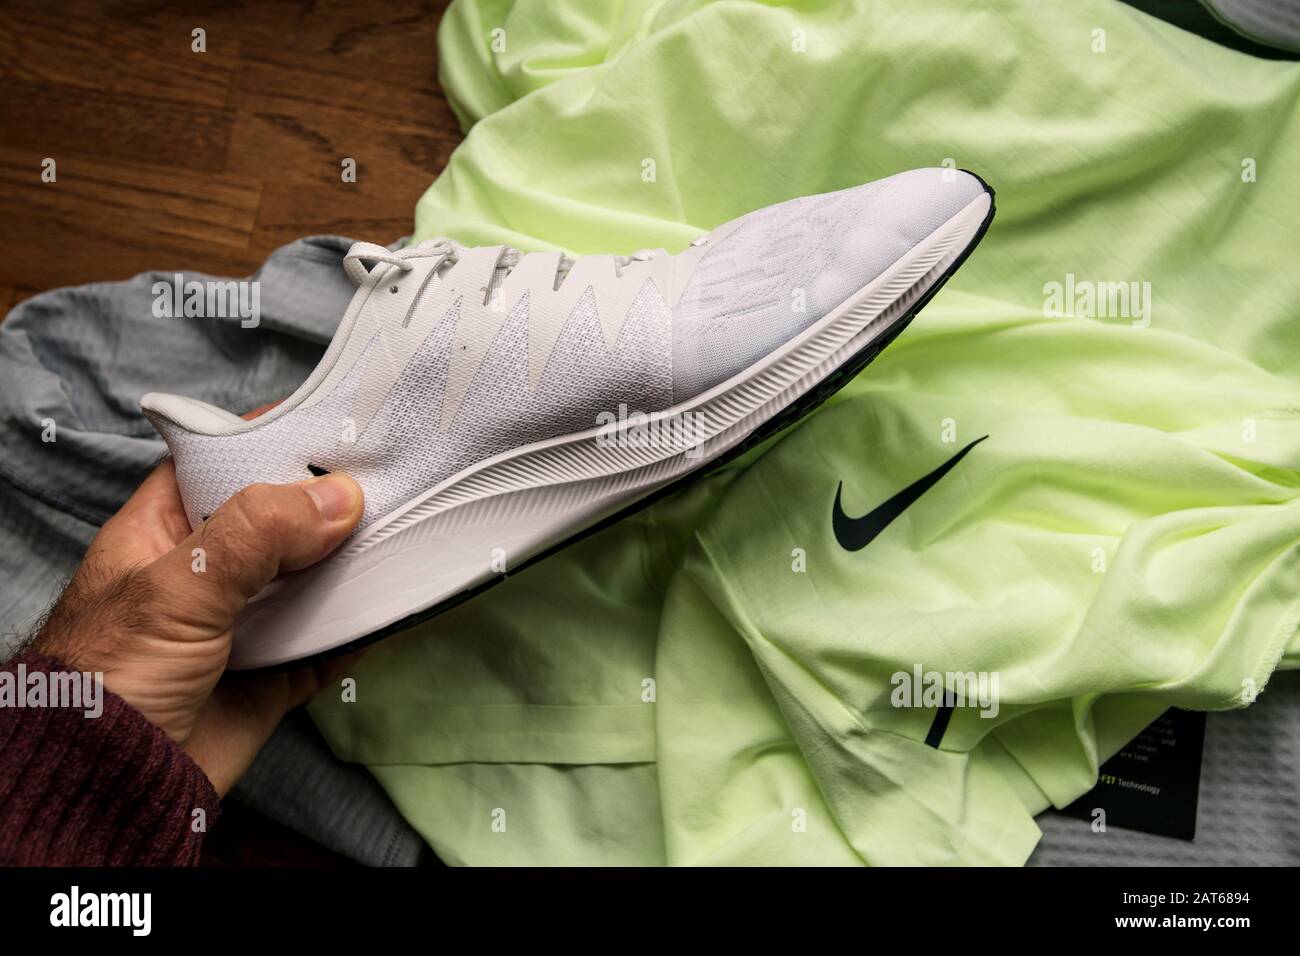 Paris, France - Sep 23, 2019: POV man hand holding looking at new white  professional running shoes manufactured by Nike Zoom Rival Fly for women  with multiple pro clothes in background Stock Photo - Alamy